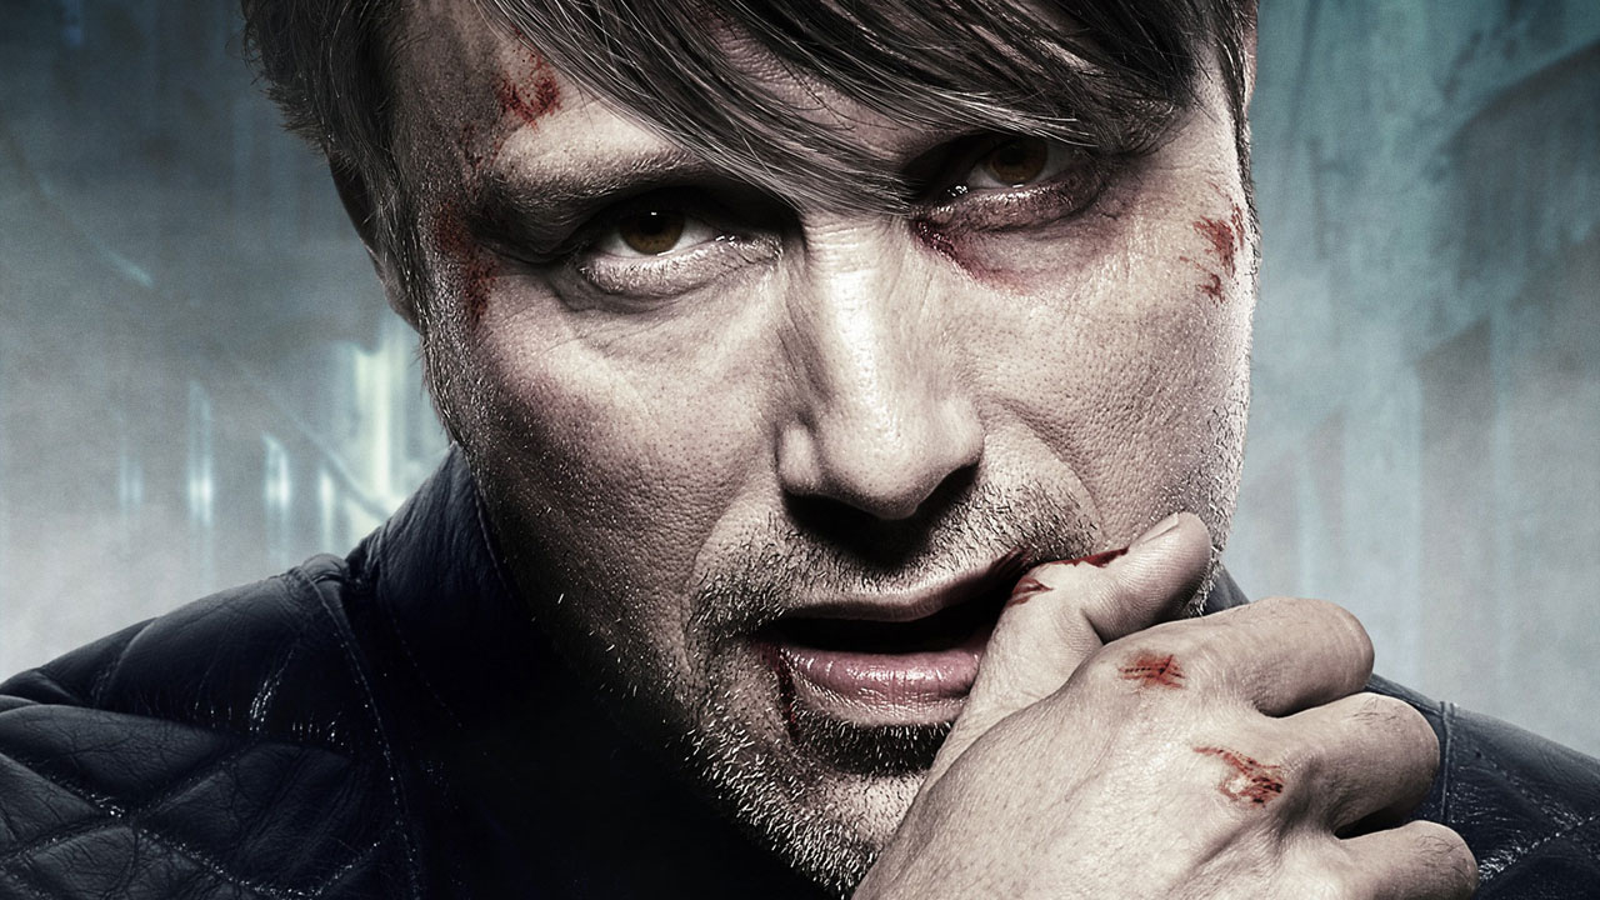 We want to believe this conspiracy theory about Mads Mikkelsen in Hideo Kojima's Death Stranding | VG247